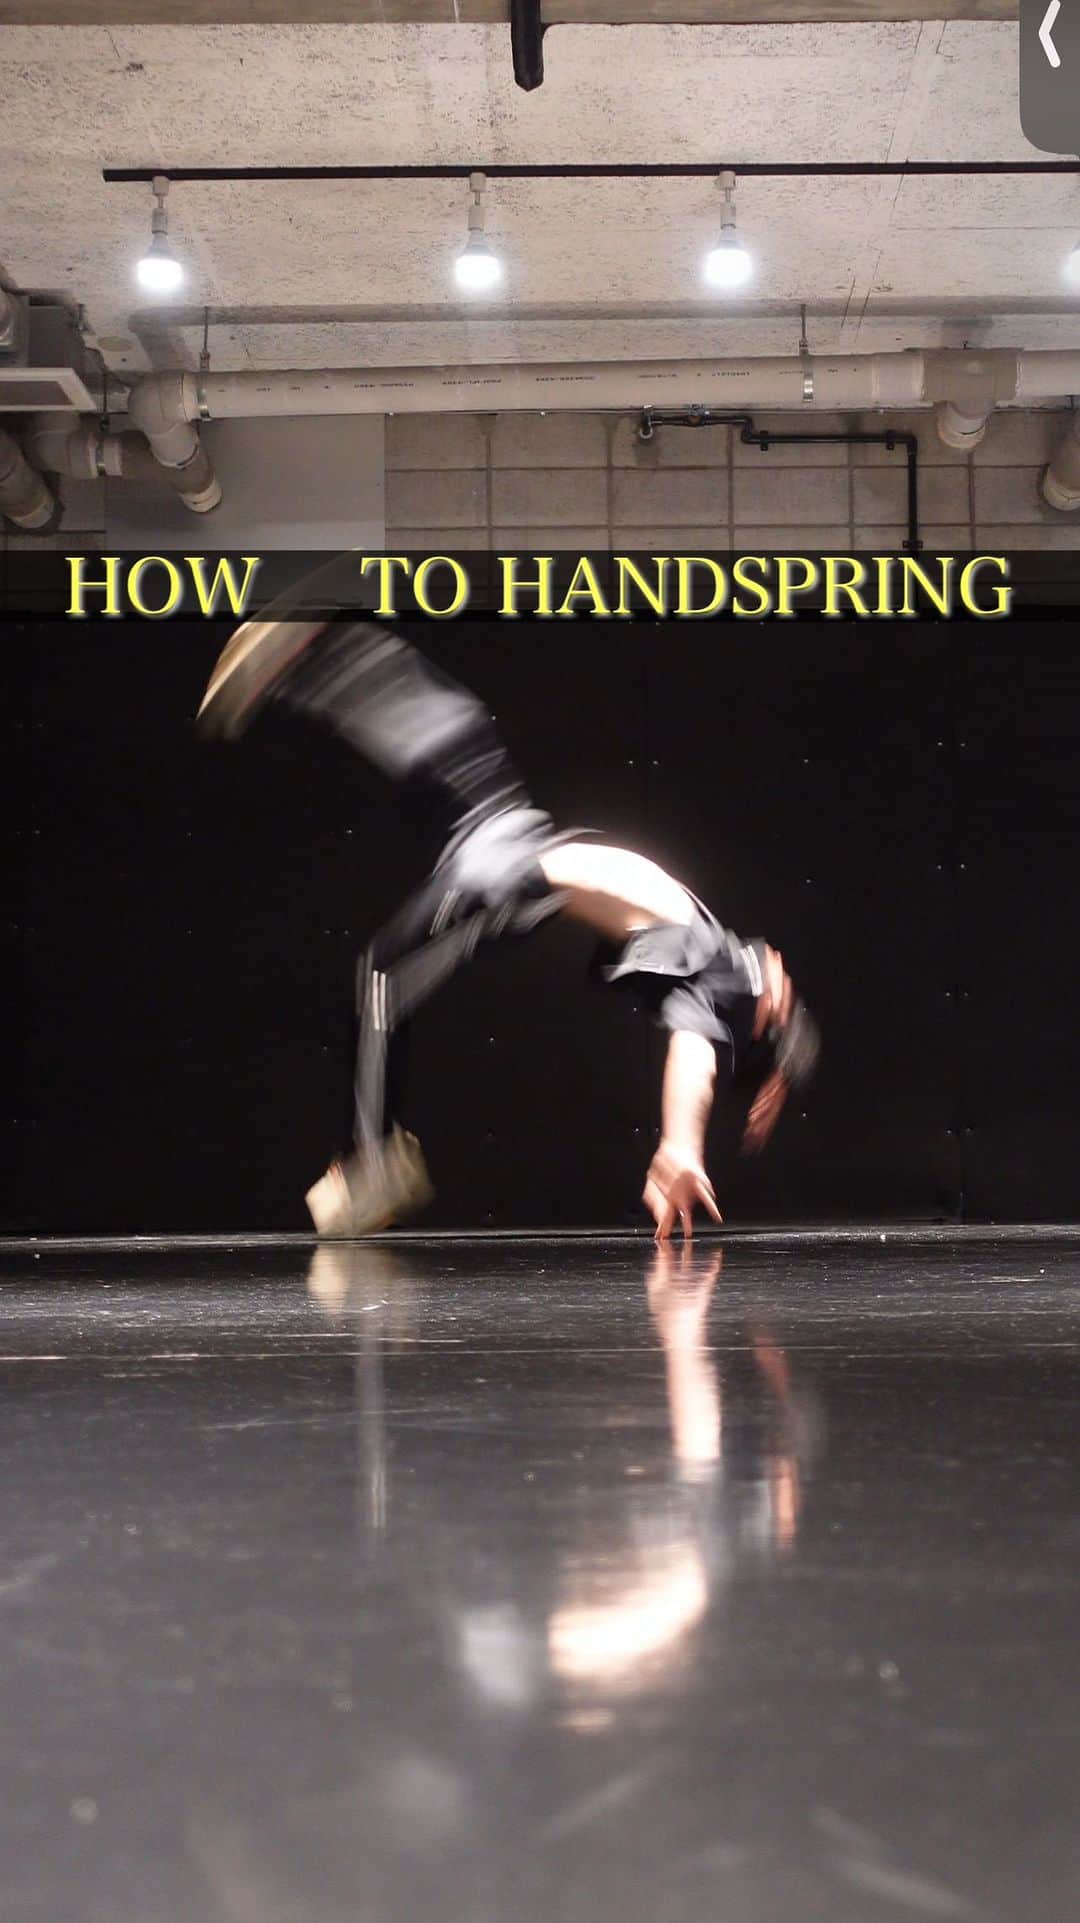 asukaのインスタグラム：「The easy way to learn 【HANDSPRING 】  Everybody can do this skill 🔥  What do you think?🤔  Lectured by @bboy_asuka   If you can master it, let me know in the comments😉 ↓↓↓↓  #dance #breaking #breakdance #bboy #powermove #powermoves #acrobatics #tricking #parkour #gymnastics #movement #capoeira #超人」